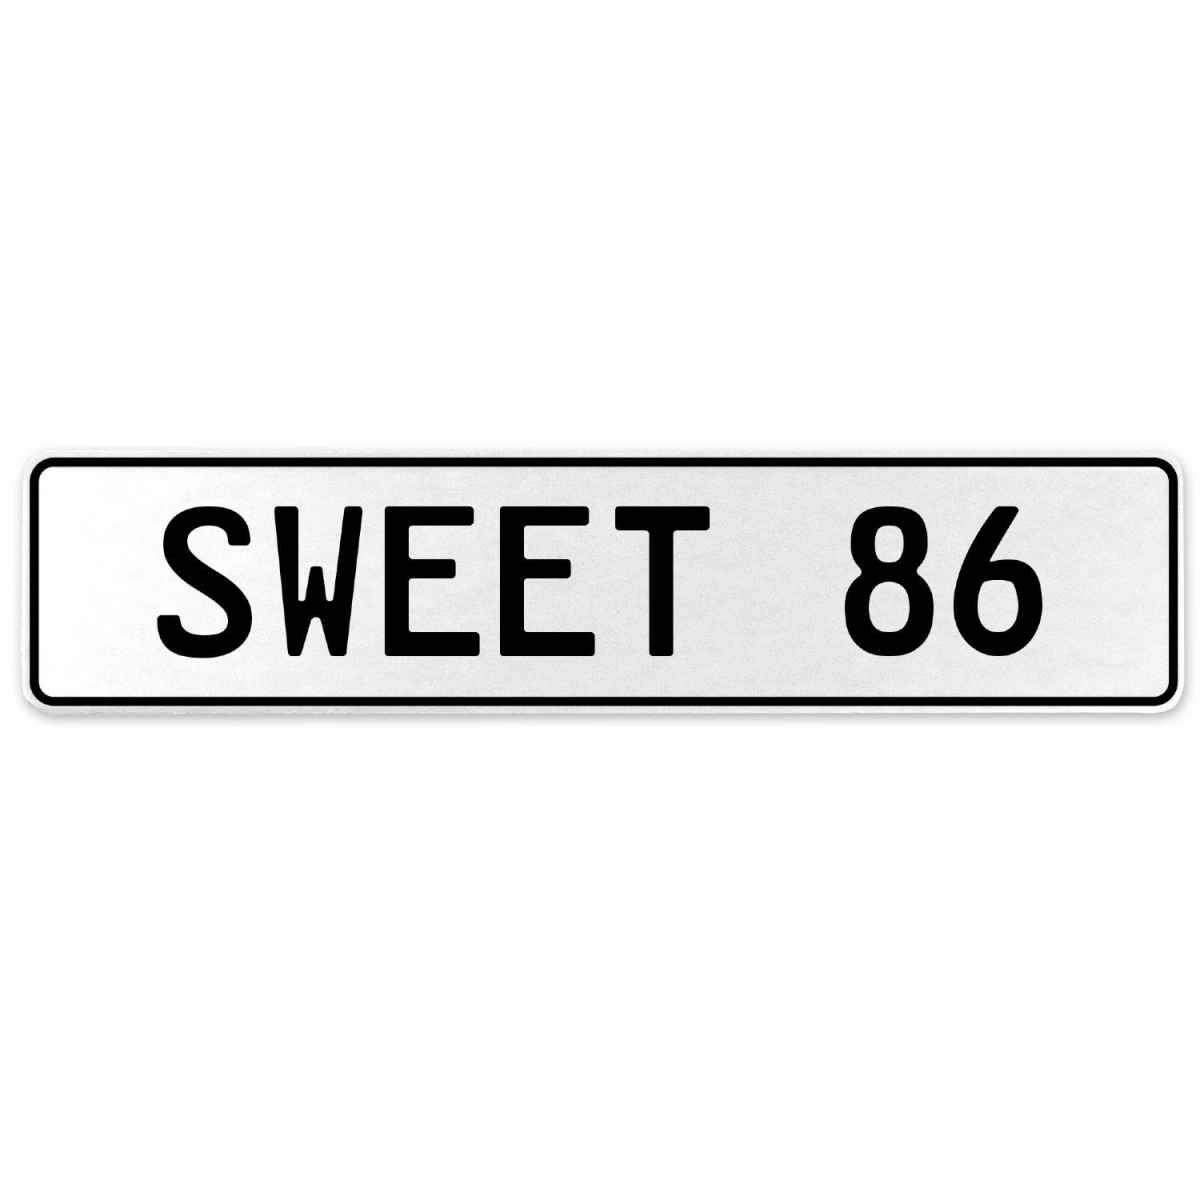 554188 Sweet 86 - White Aluminum Street Sign Mancave Euro Plate Name Door Sign Wall